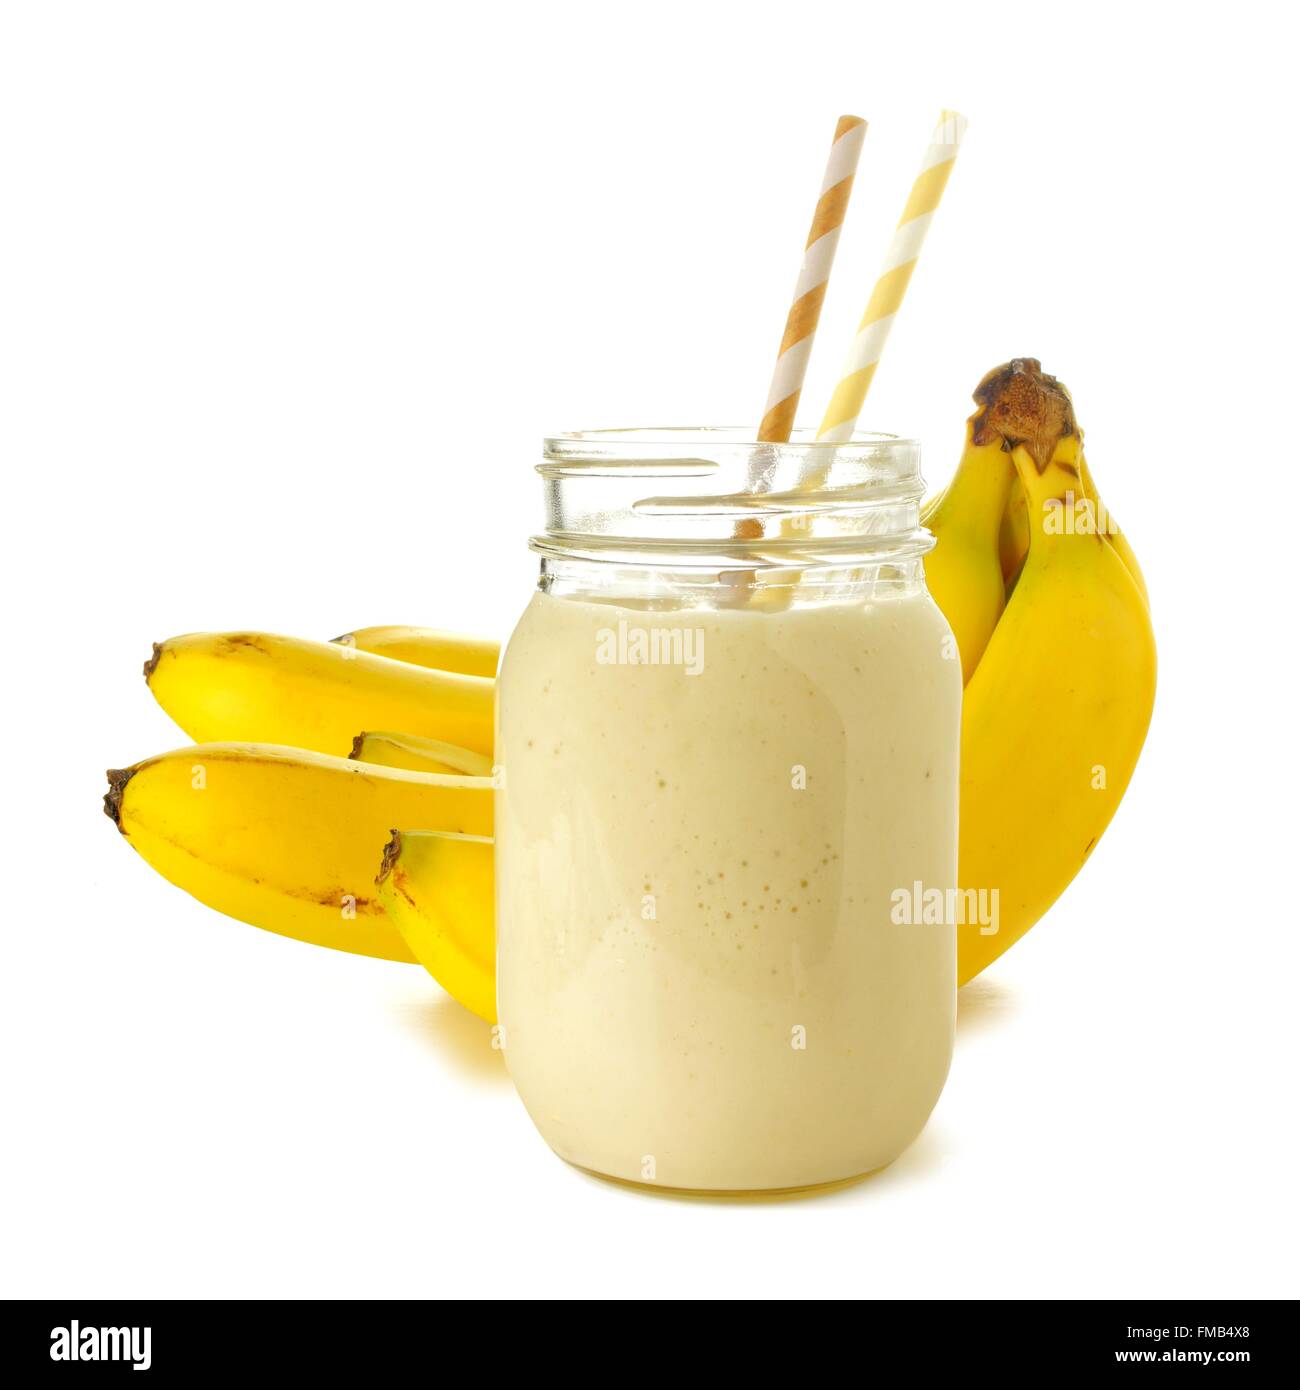 Banana smoothie in a jar with straws over white, bananas in background Stock Photo